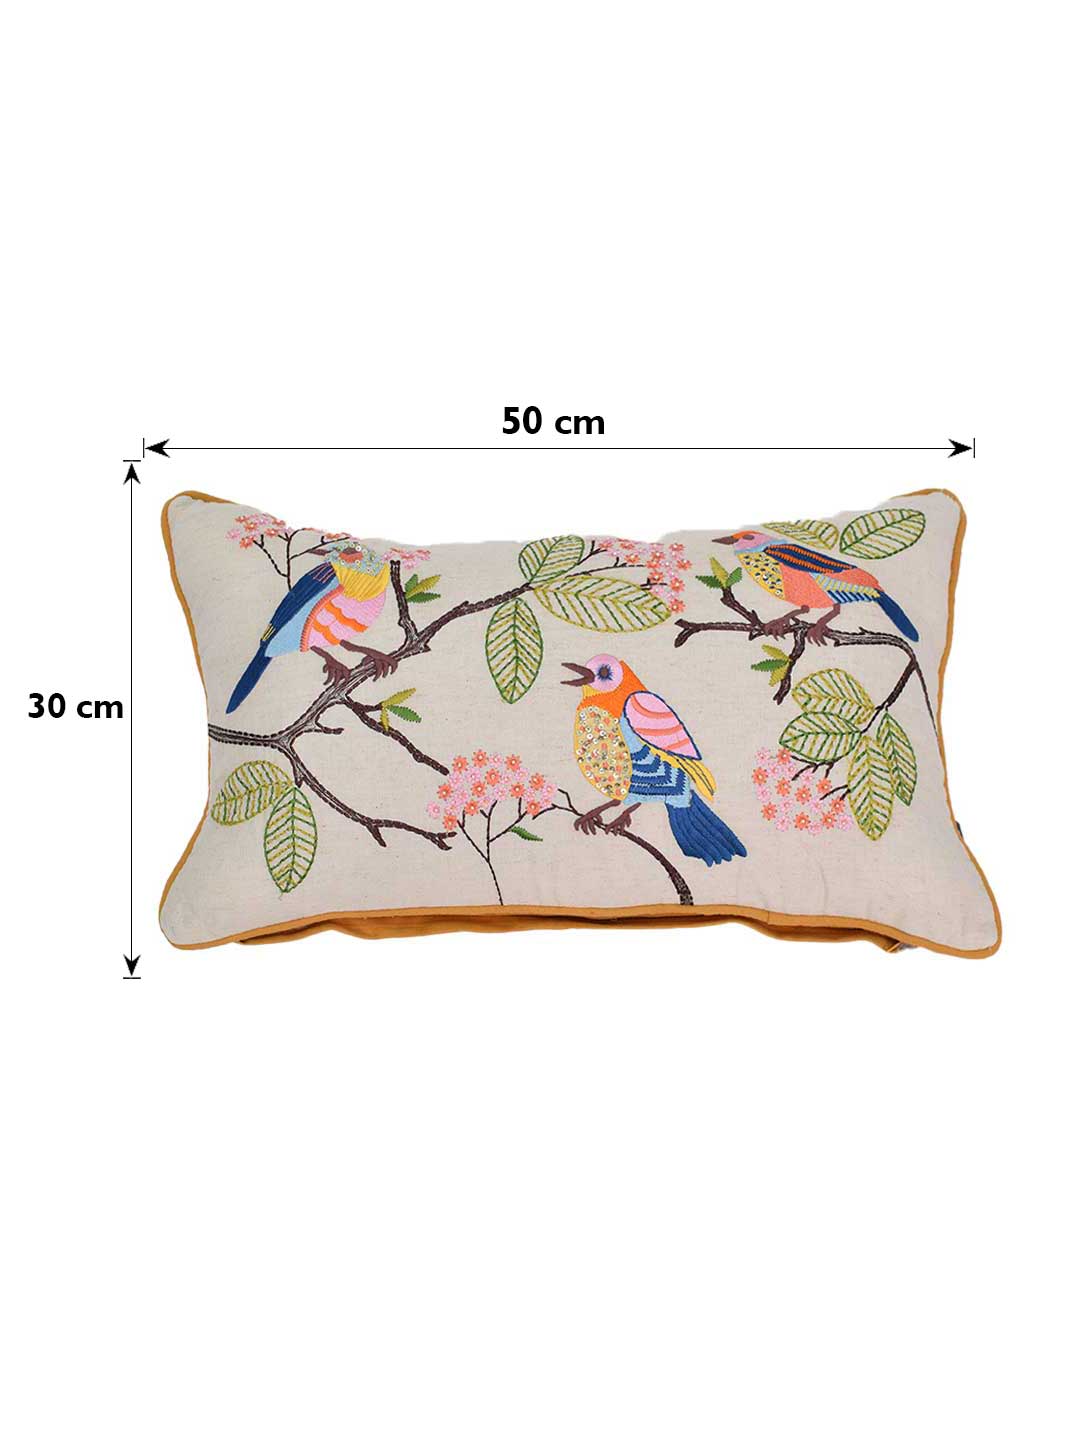 Sweety in the garden Cushion Cover with Filler 30x50cm